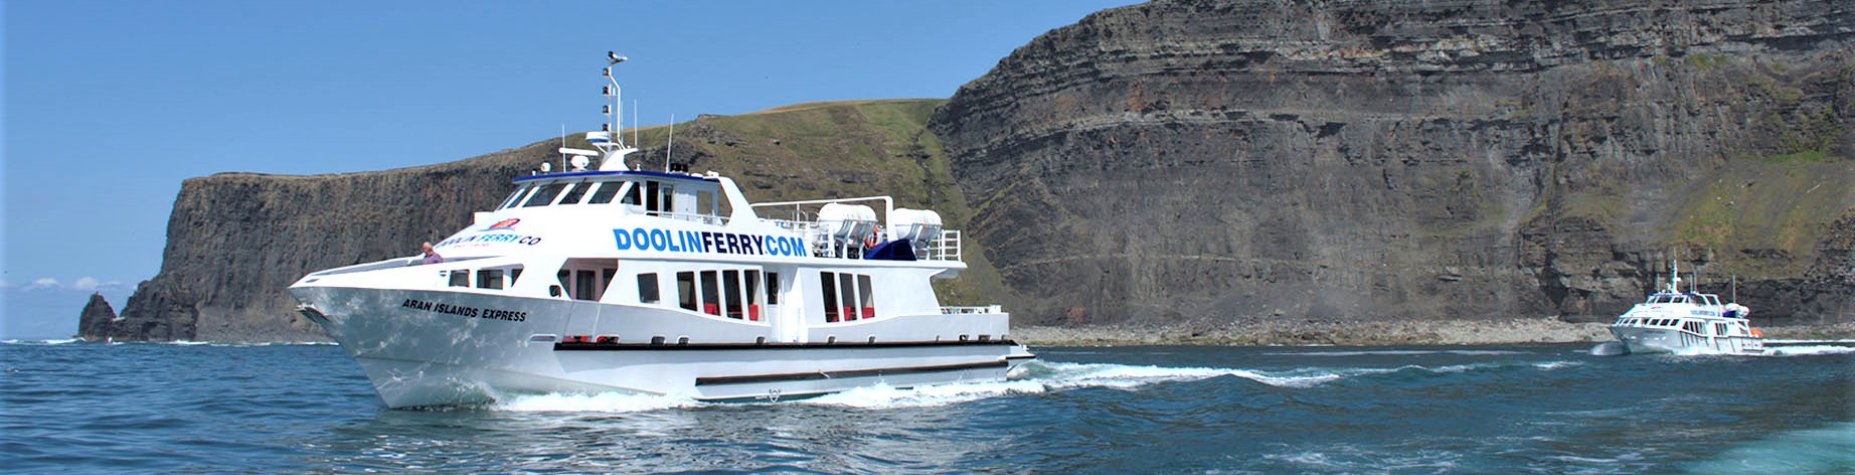 Two Ferry Boats of the Doolin Ferry Company on the Atlantic Coast With Cliffs of Moher in the Background